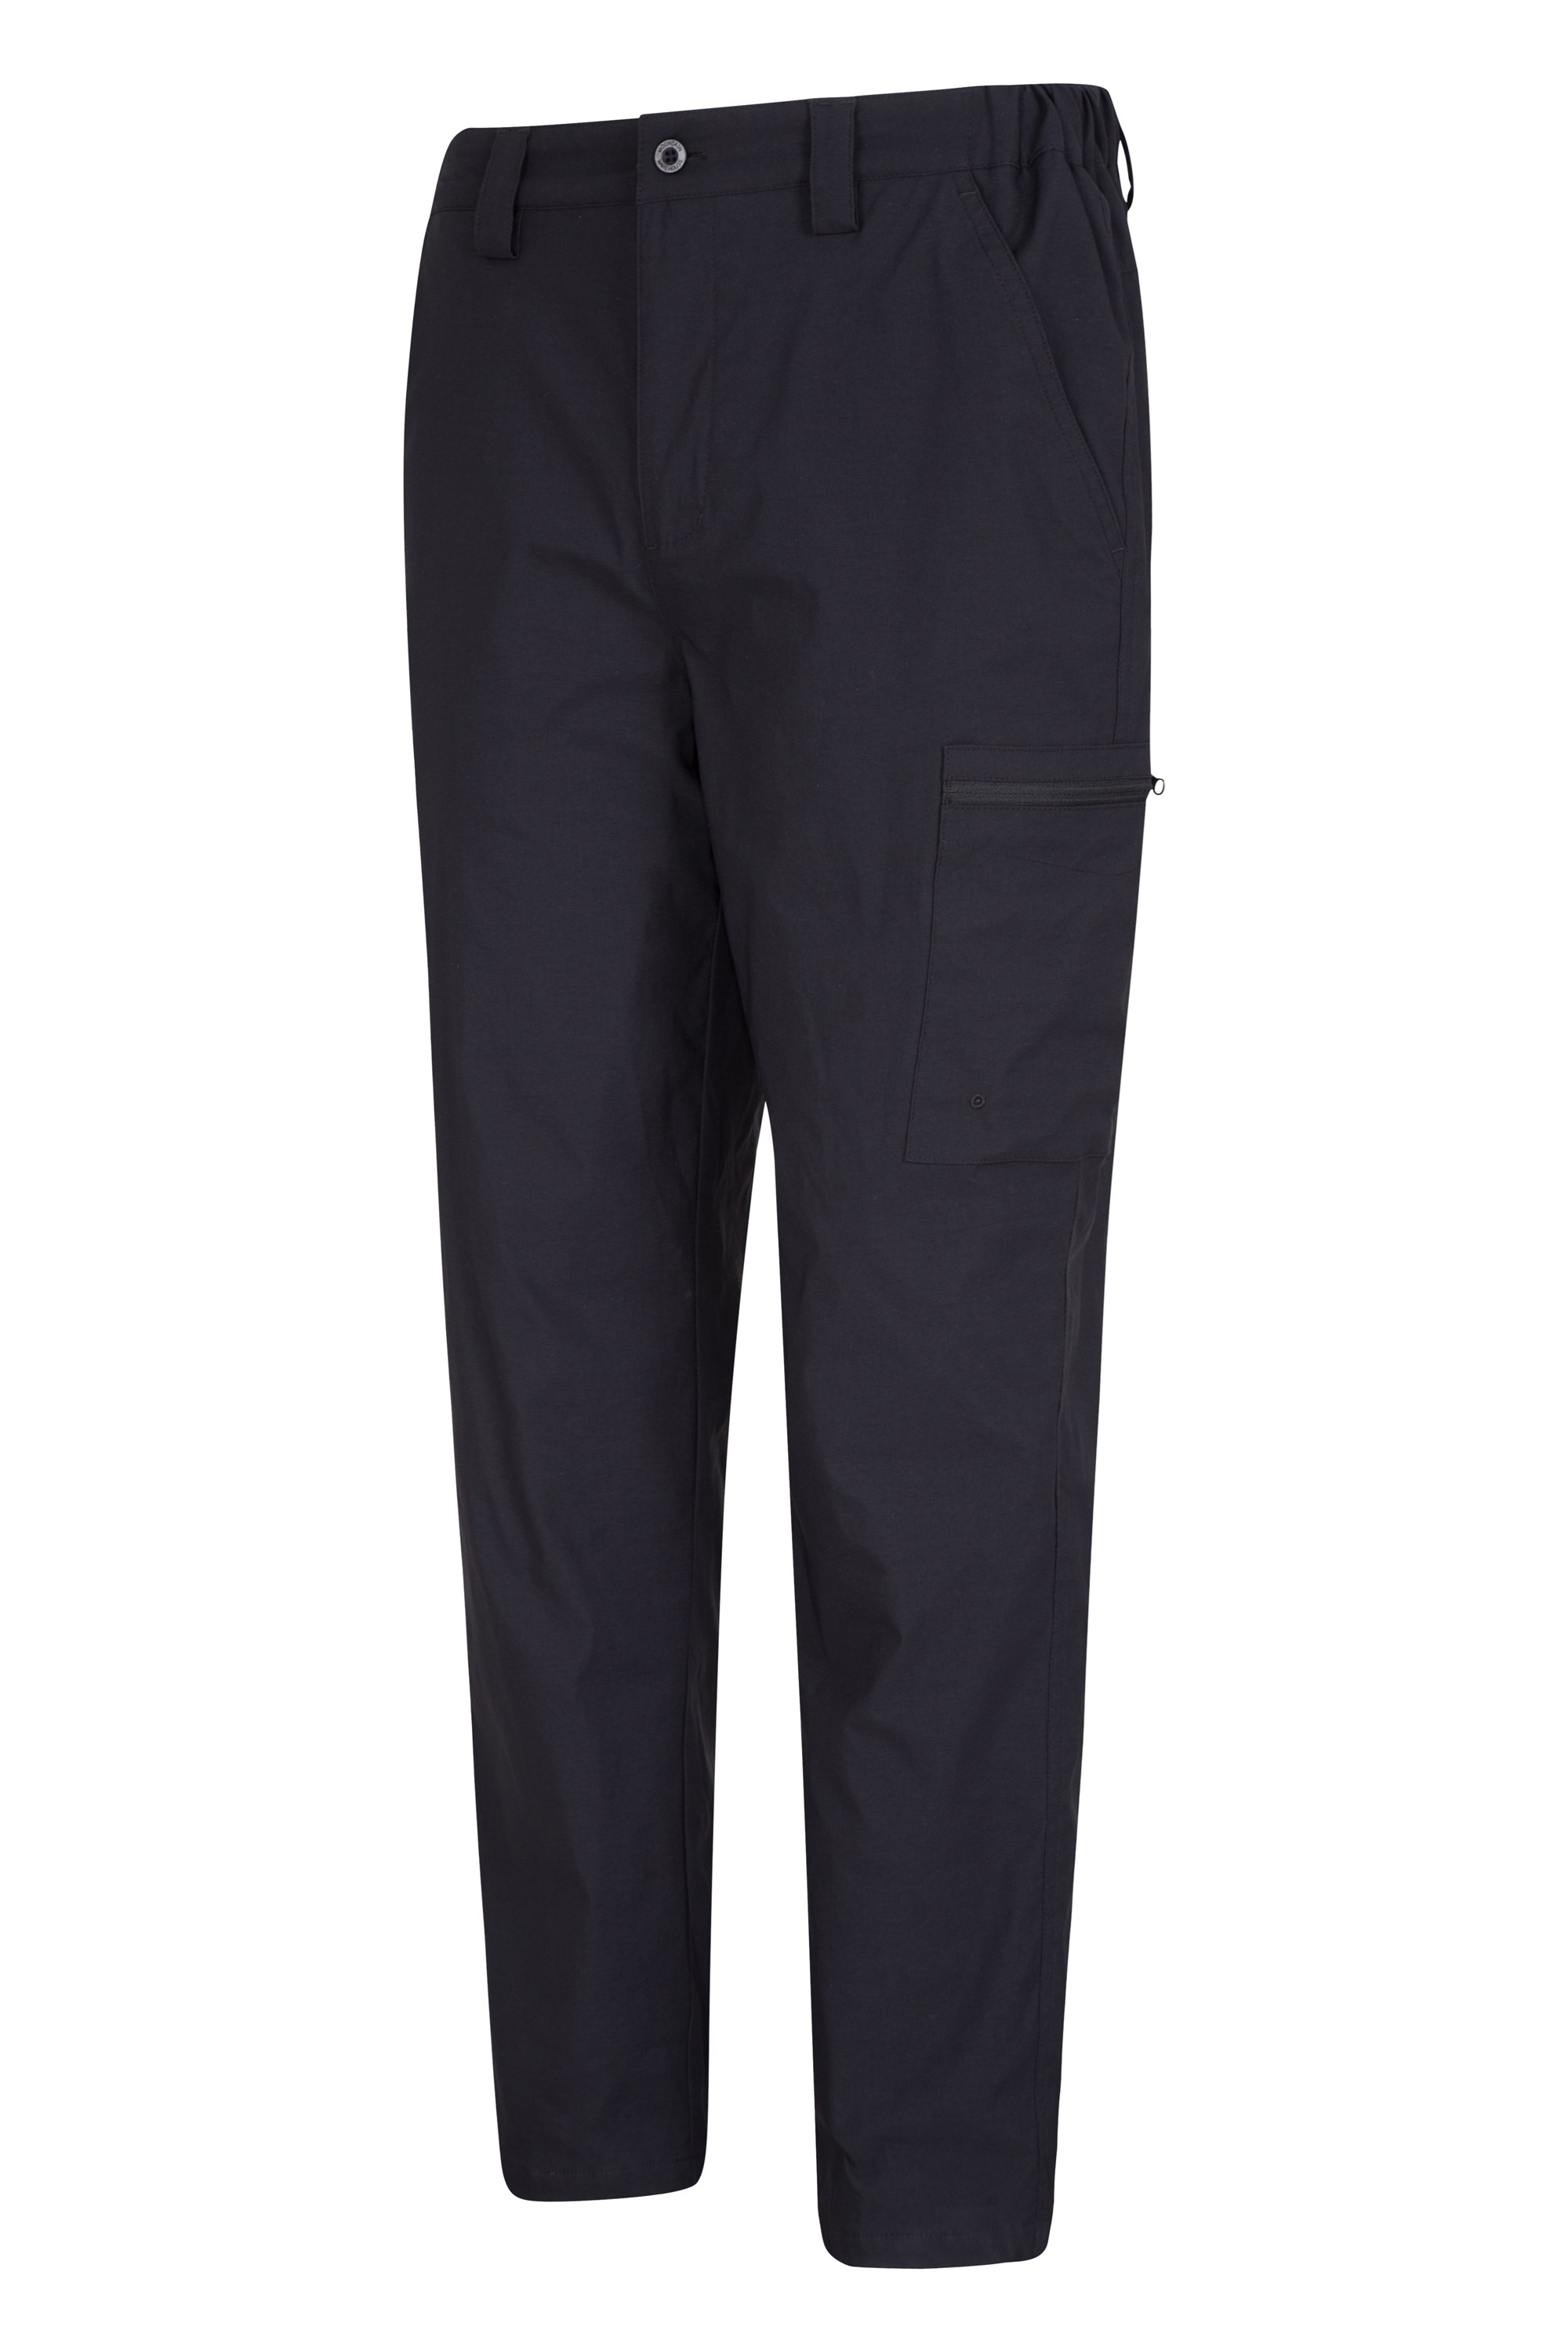 Buying Guide Outdoor Trousers  Blacks